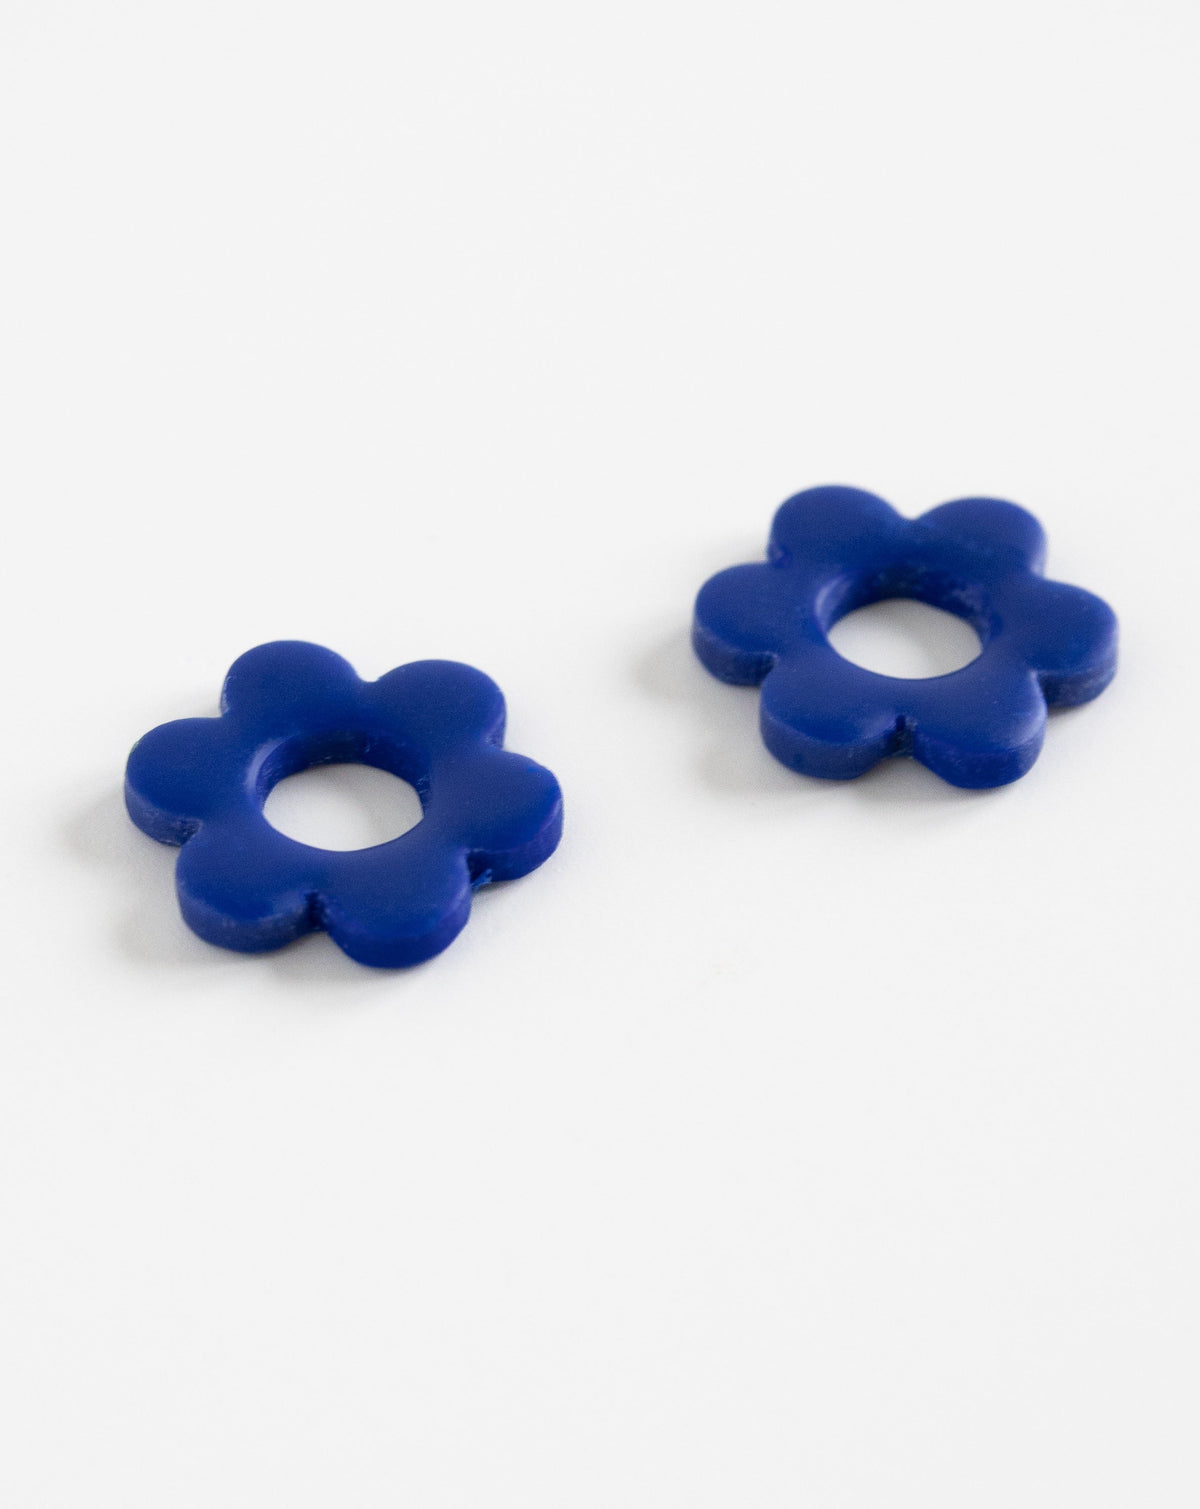 Goli Beads in Hue Blue color, angled view.